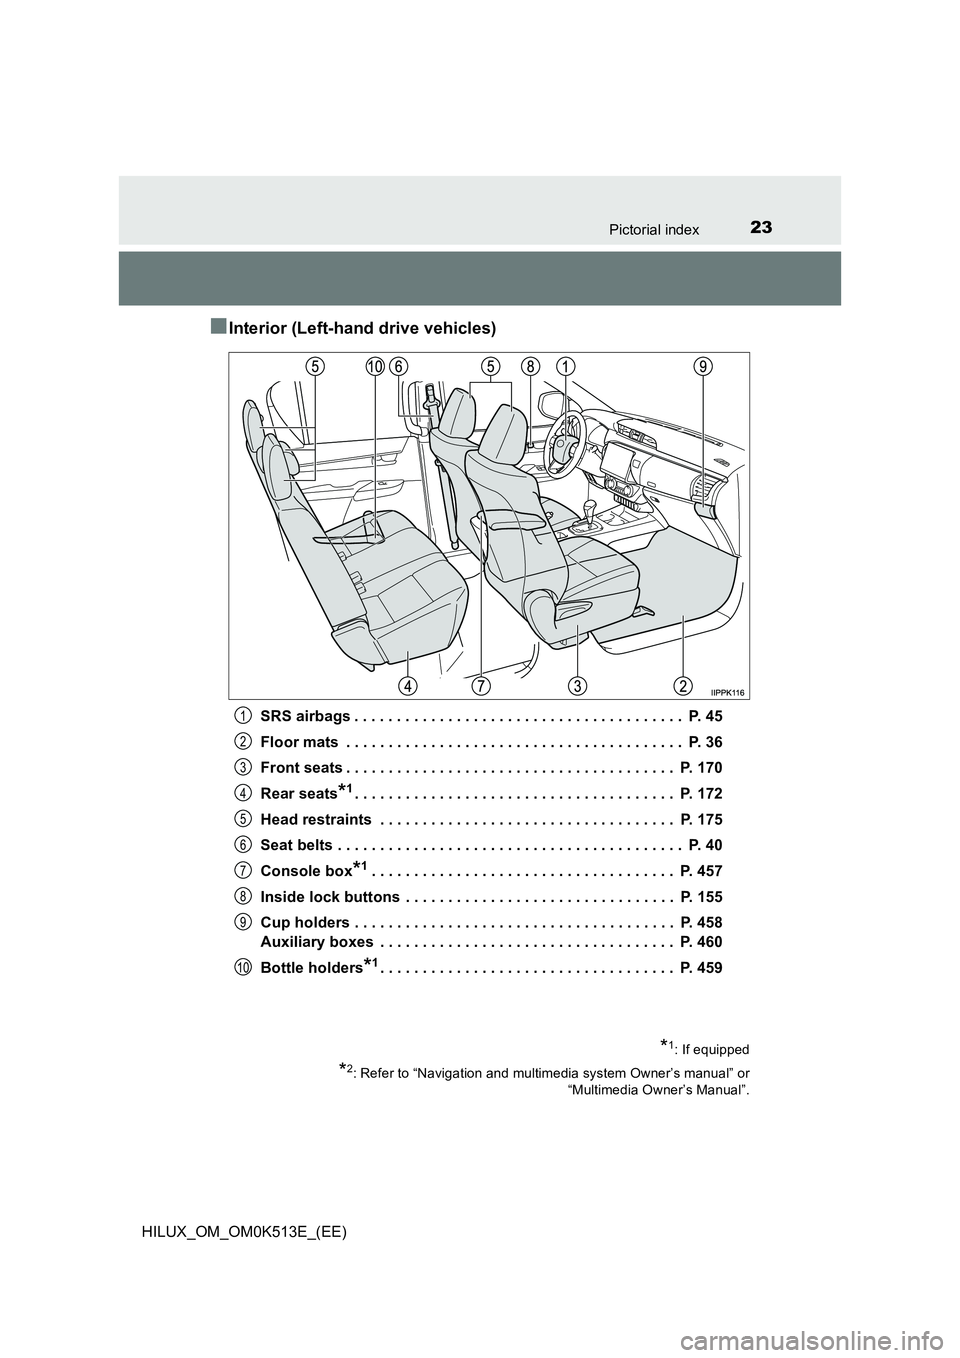 TOYOTA HILUX 2022  Owners Manual 23Pictorial index
HILUX_OM_OM0K513E_(EE)
�QInterior (Left-hand drive vehicles)
SRS airbags . . . . . . . . . . . . . . . . . . . . . . . . . . . . . . . . . . . . . . .  P. 45 
Floor mats  . . . . . .